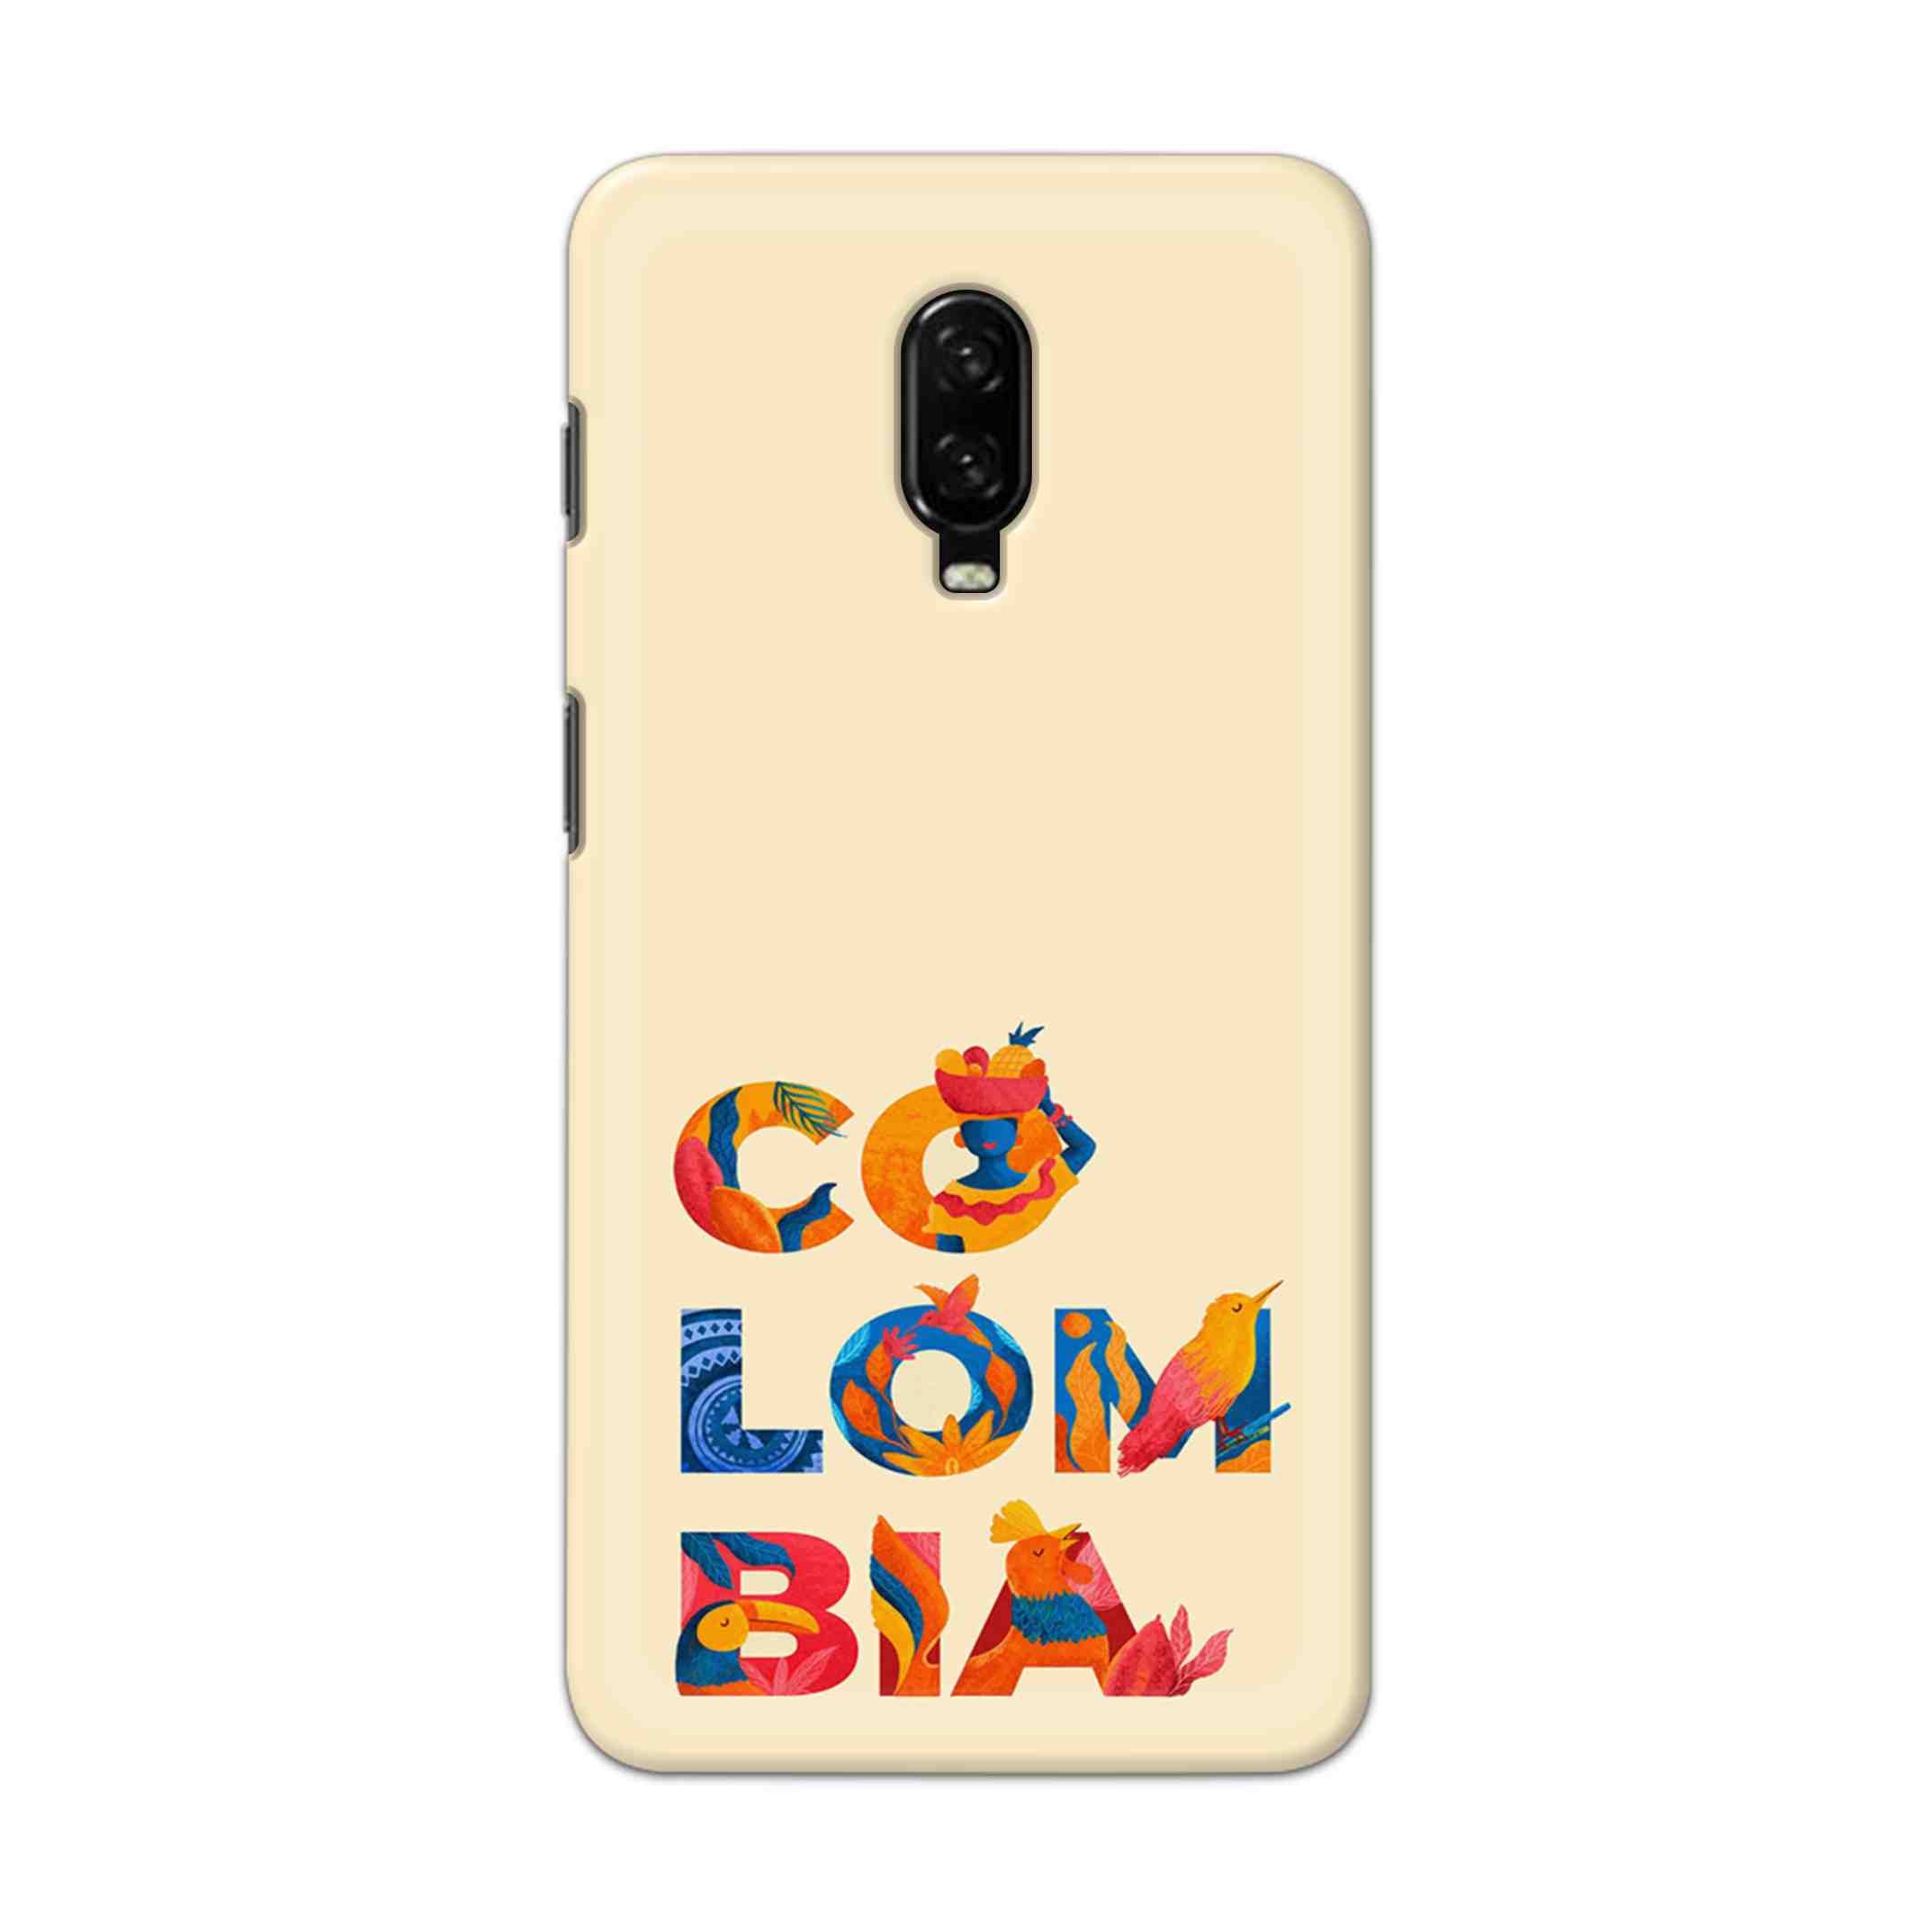 Buy Colombia Hard Back Mobile Phone Case Cover For OnePlus 6T Online